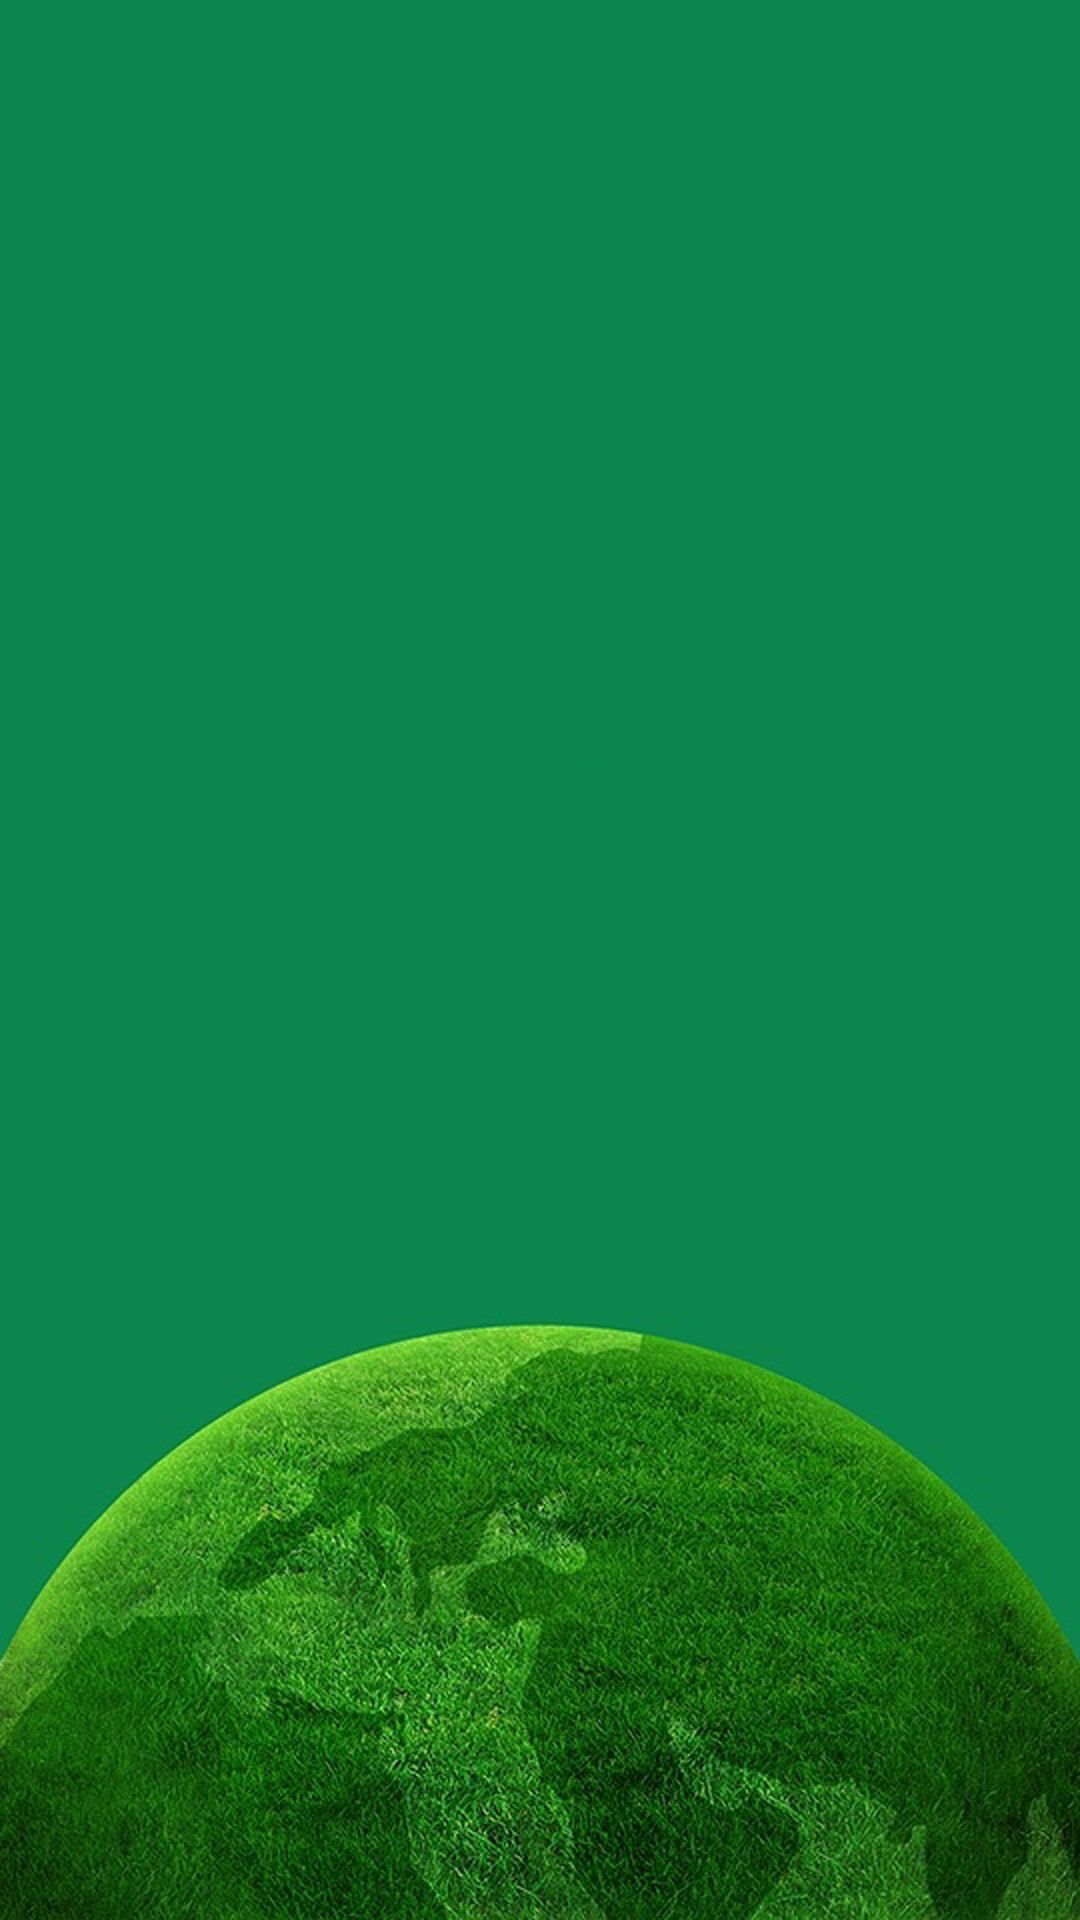 High Resolution Ultra HD 4K Minimal Mobile Wallpaper Download. Minimal wallpaper, Cute mobile wallpaper, Color wallpaper iphone